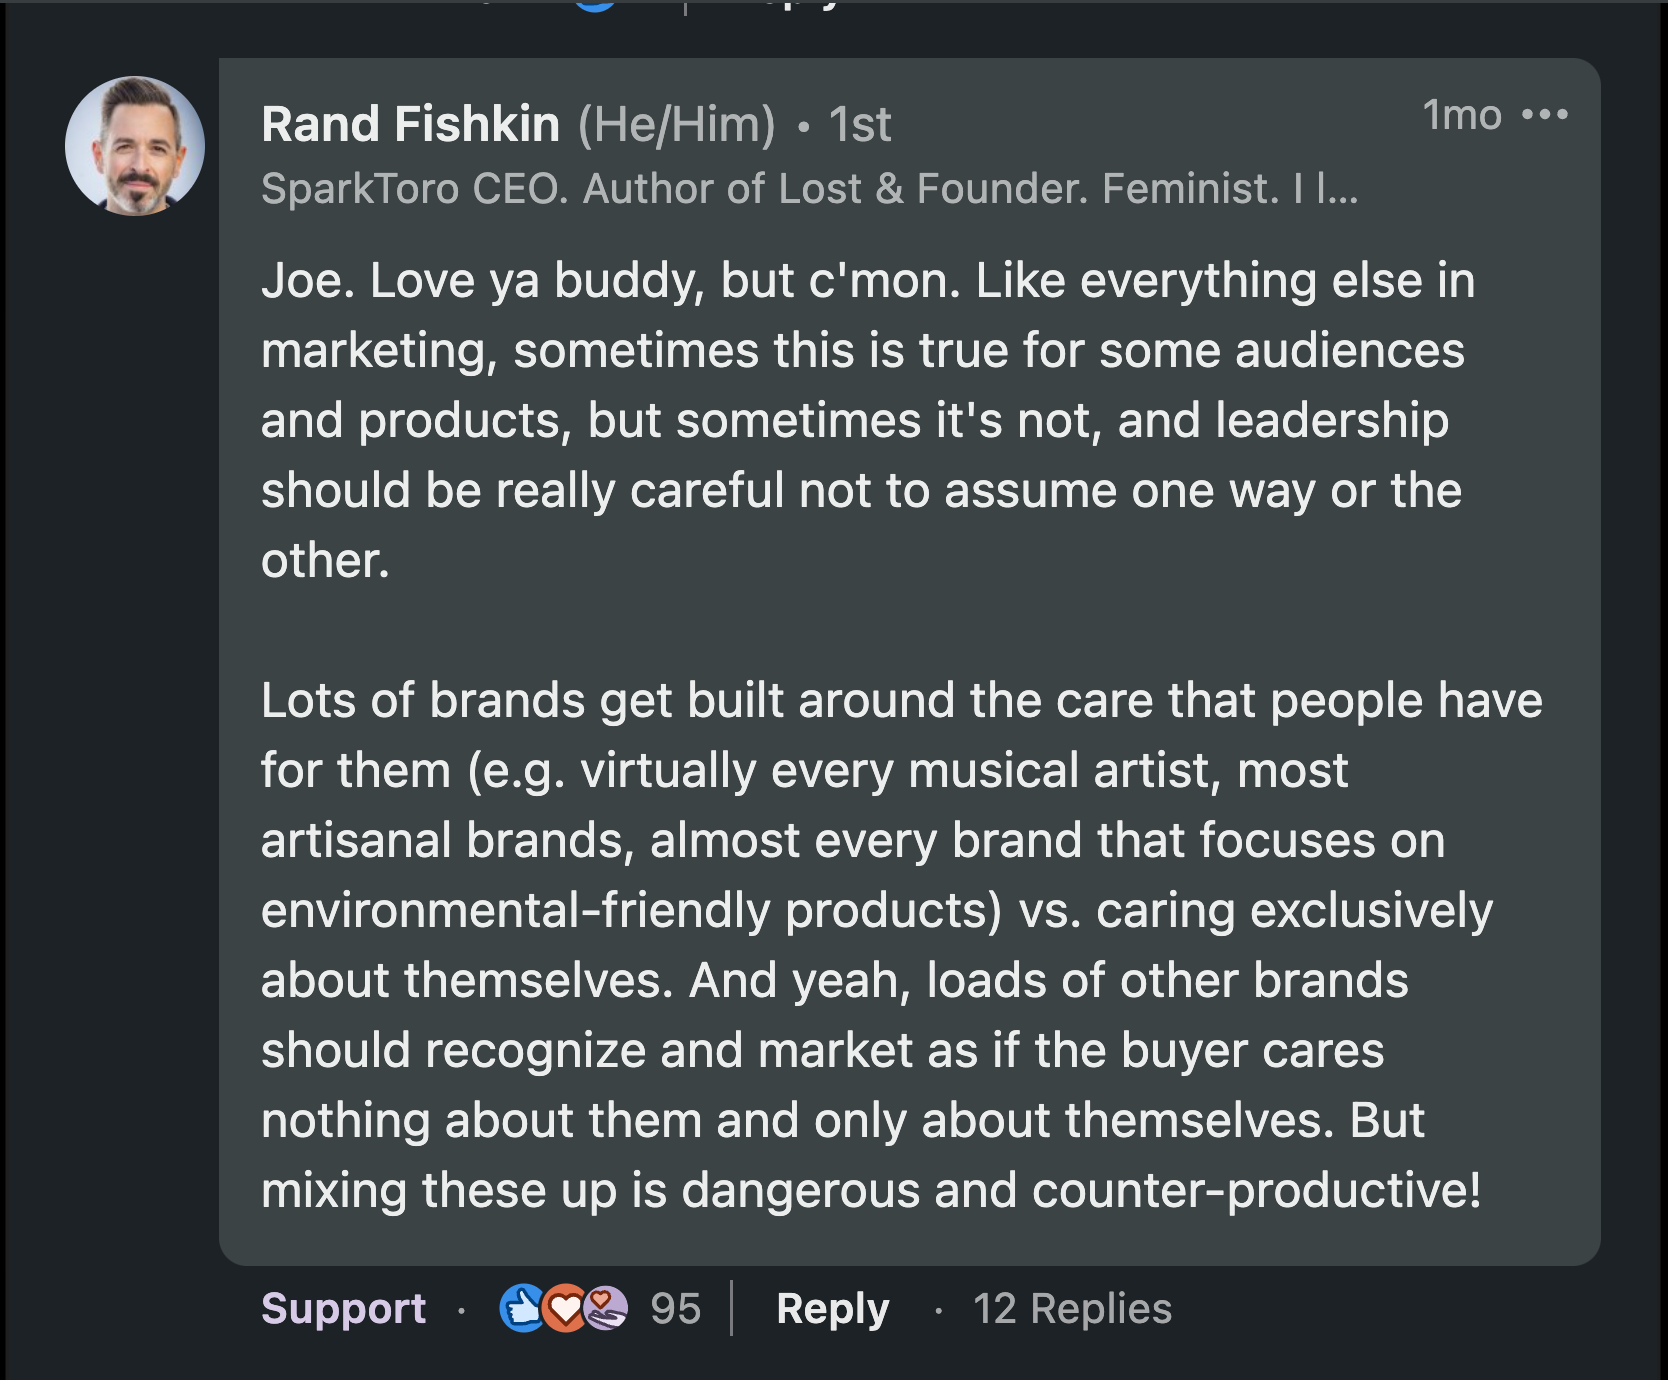 Joe. Love ya buddy, but c'mon. Like everything else in marketing, sometimes this is true for some audiences and products, but sometimes it's not, and leadership should be really careful not to assume one way or the other.  Lots of brands get built around the care that people have for them (e.g. virtually every musical artist, most artisanal brands, almost every brand that focuses on environmental-friendly products) vs. caring exclusively about themselves. And yeah, loads of other brands should recognize and market as if the buyer cares nothing about them and only about themselves. But mixing these up is dangerous and counter-productive!